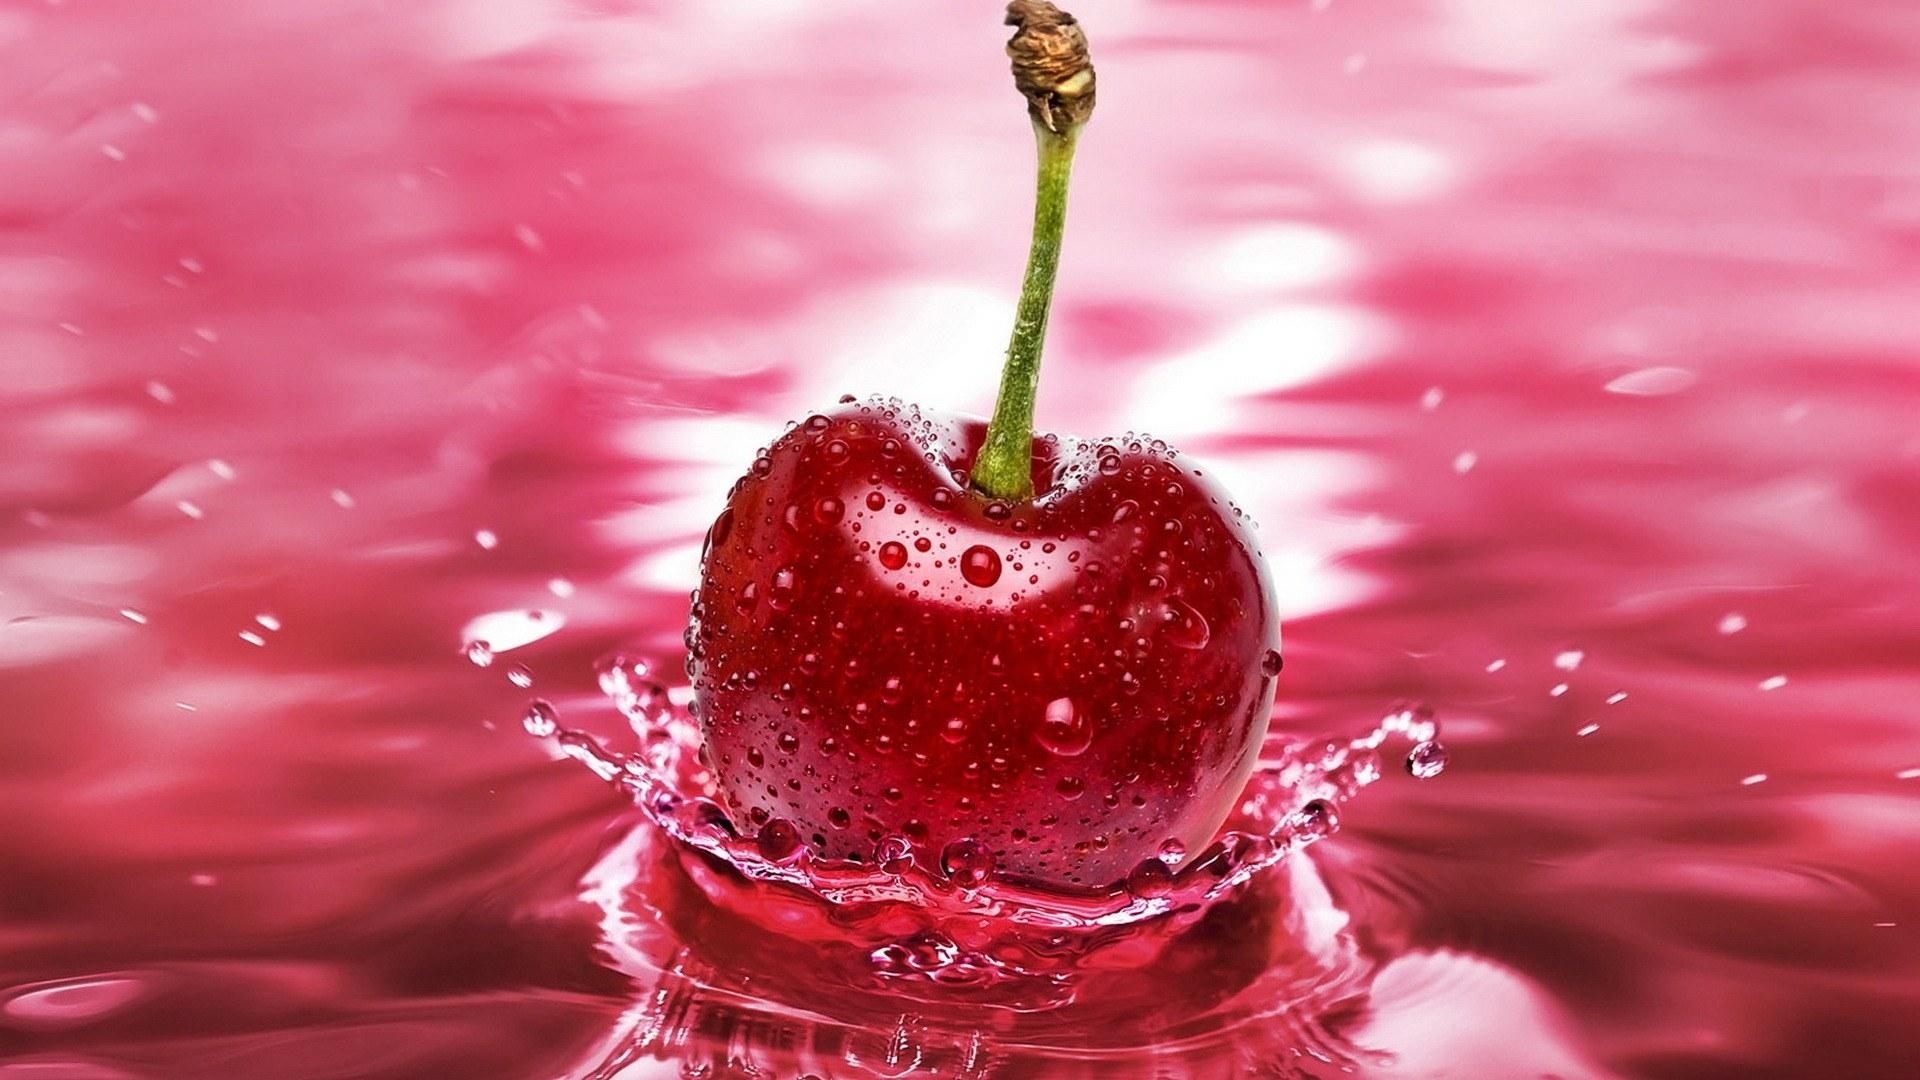 fruits, drops, water, food, cherry, red UHD